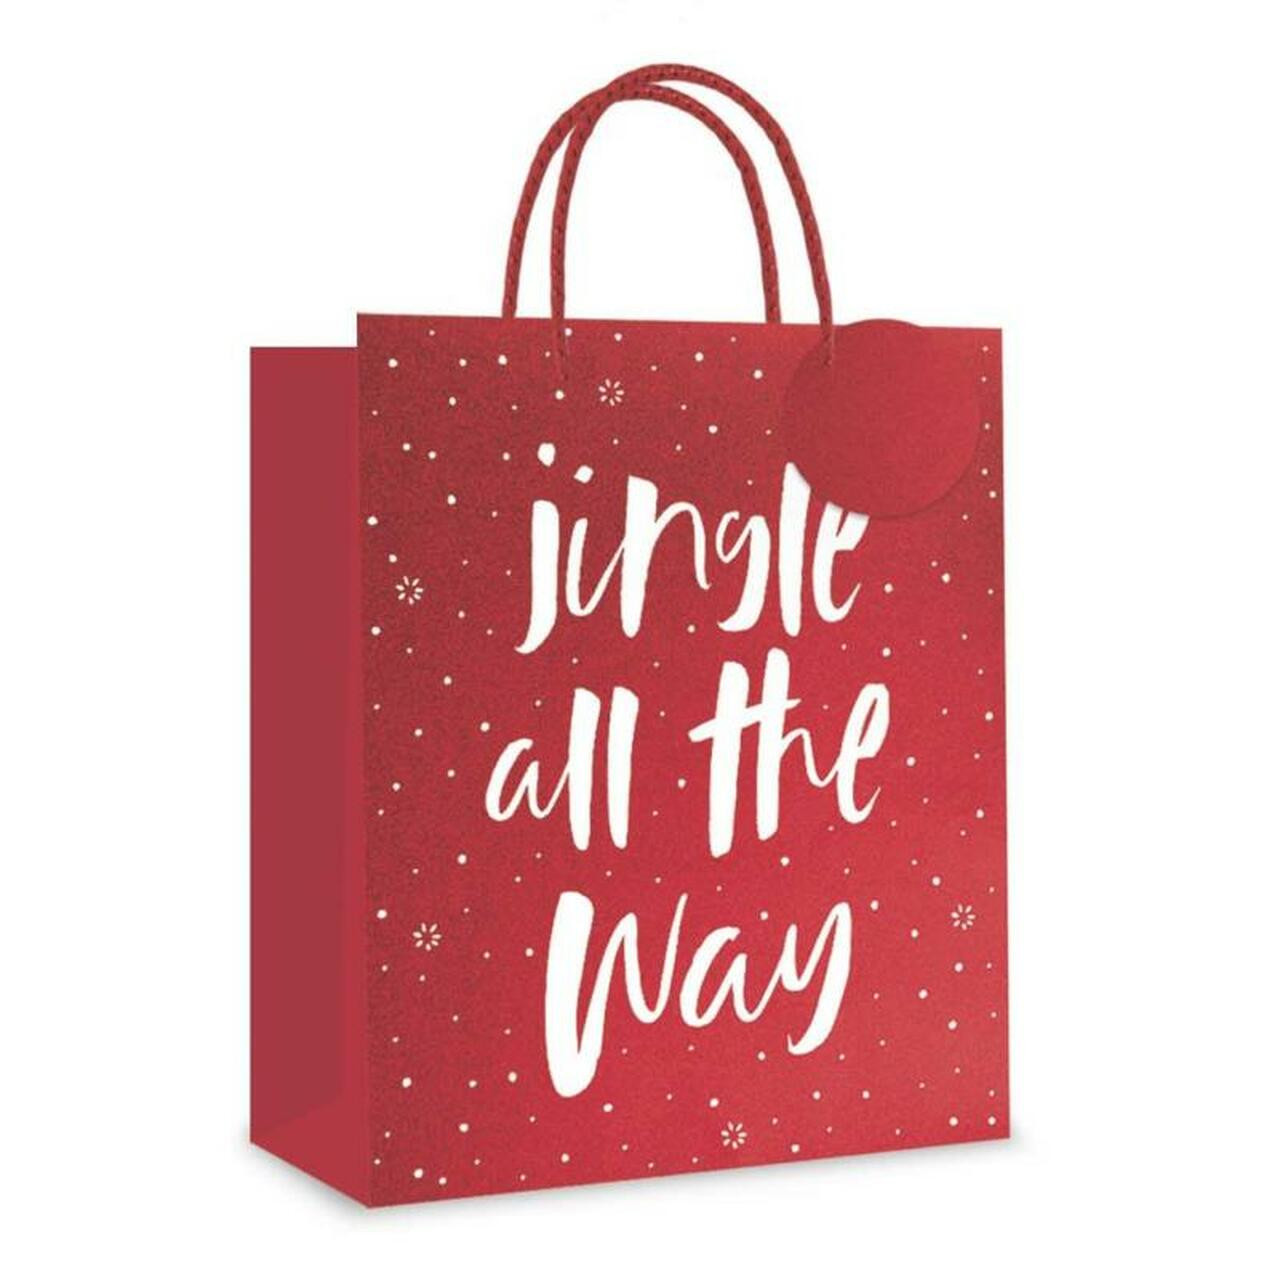 Personalized Gift Bags for Christmas Canvas Bulk Holiday Party Favor Bags  for Kids Adults Drawstring Christmas Bags for Gift Wrapping - Etsy |  Personalized gift bags, Christmas goodie bags, Christmas bags